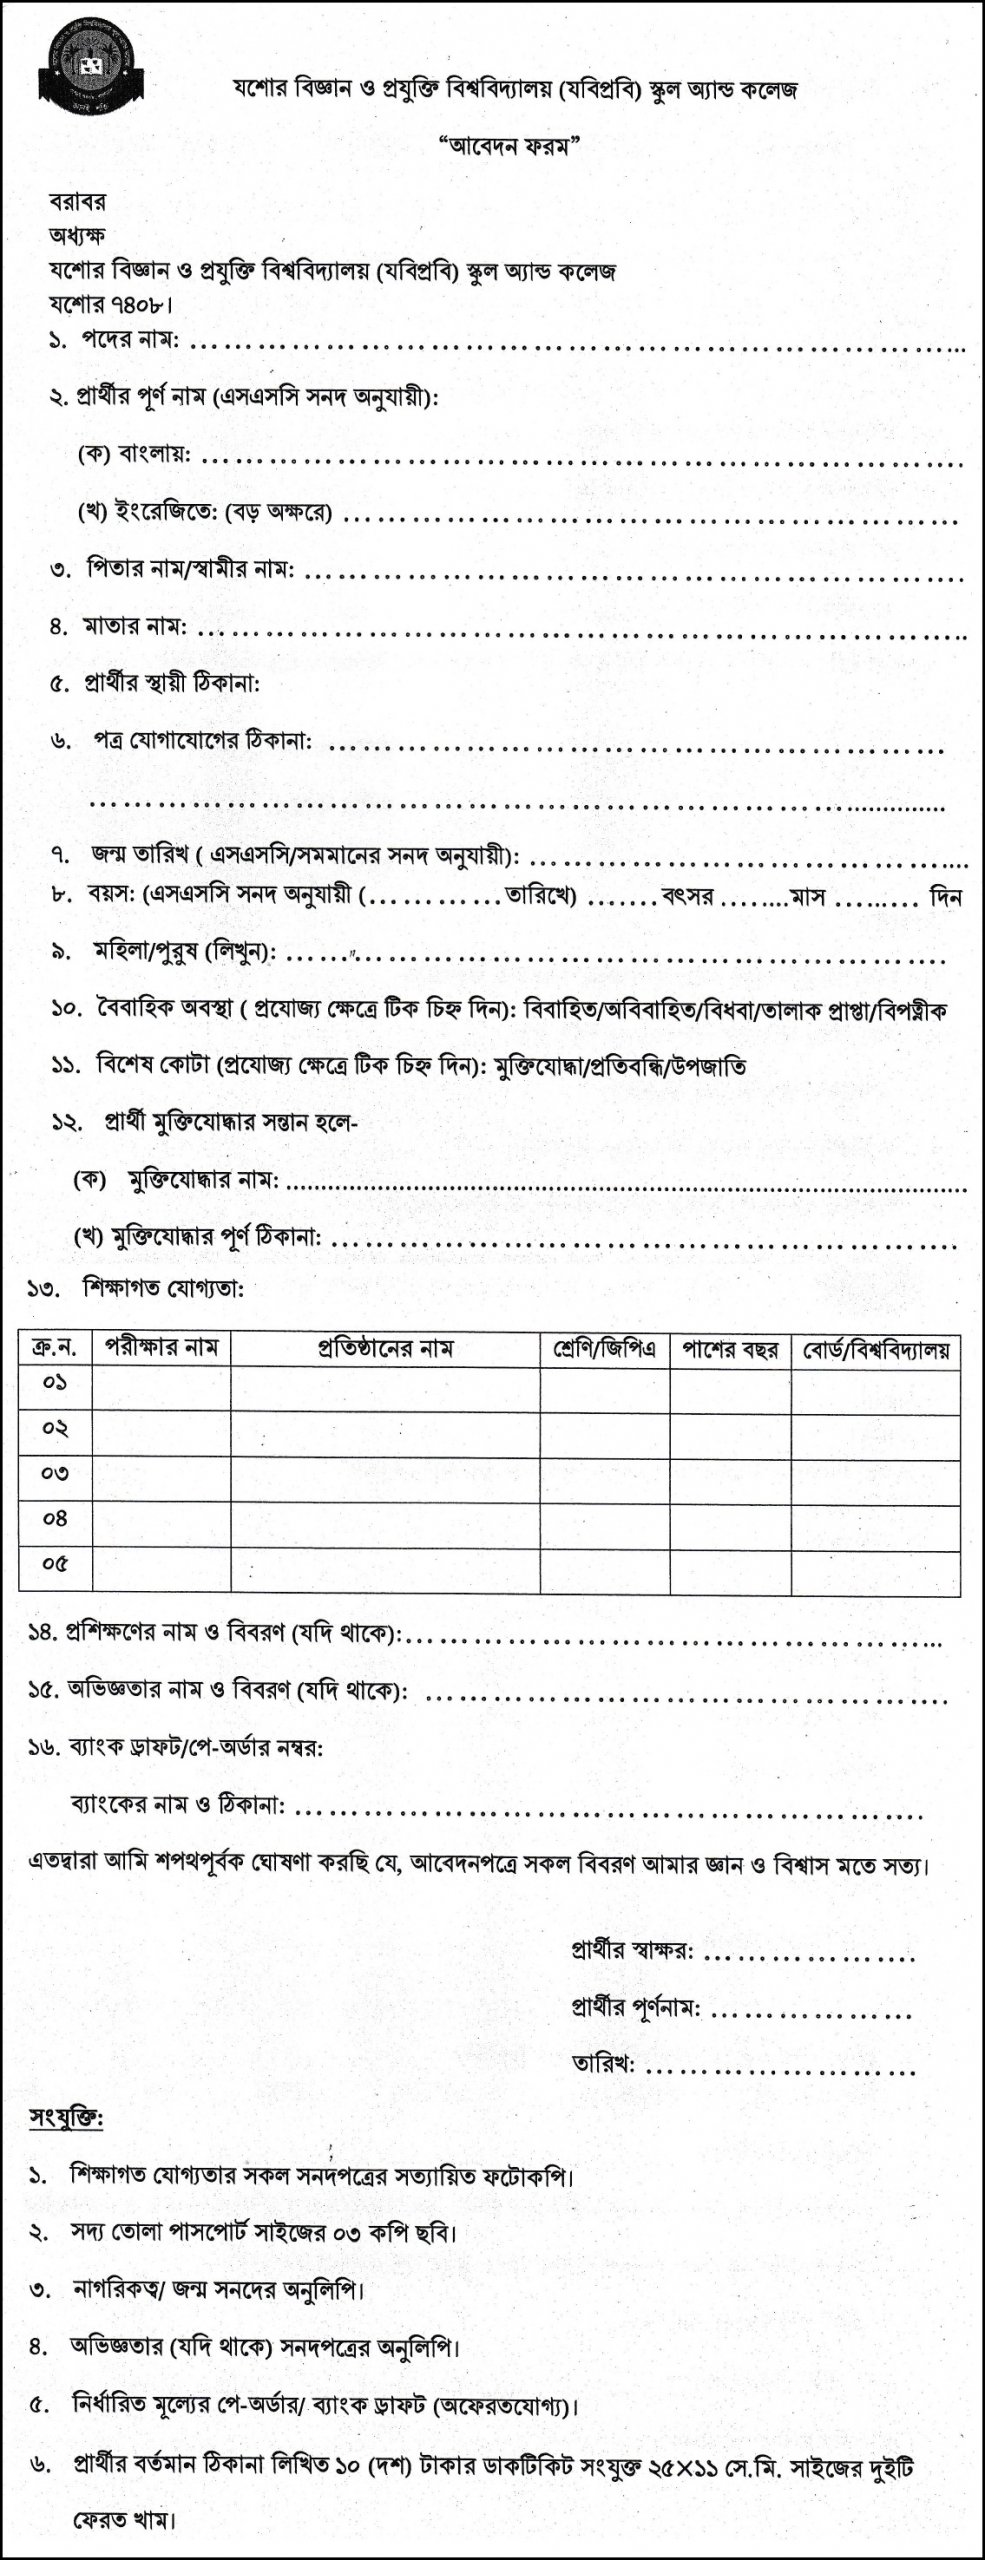 Jessore University of Science and Technology Application Form 2020